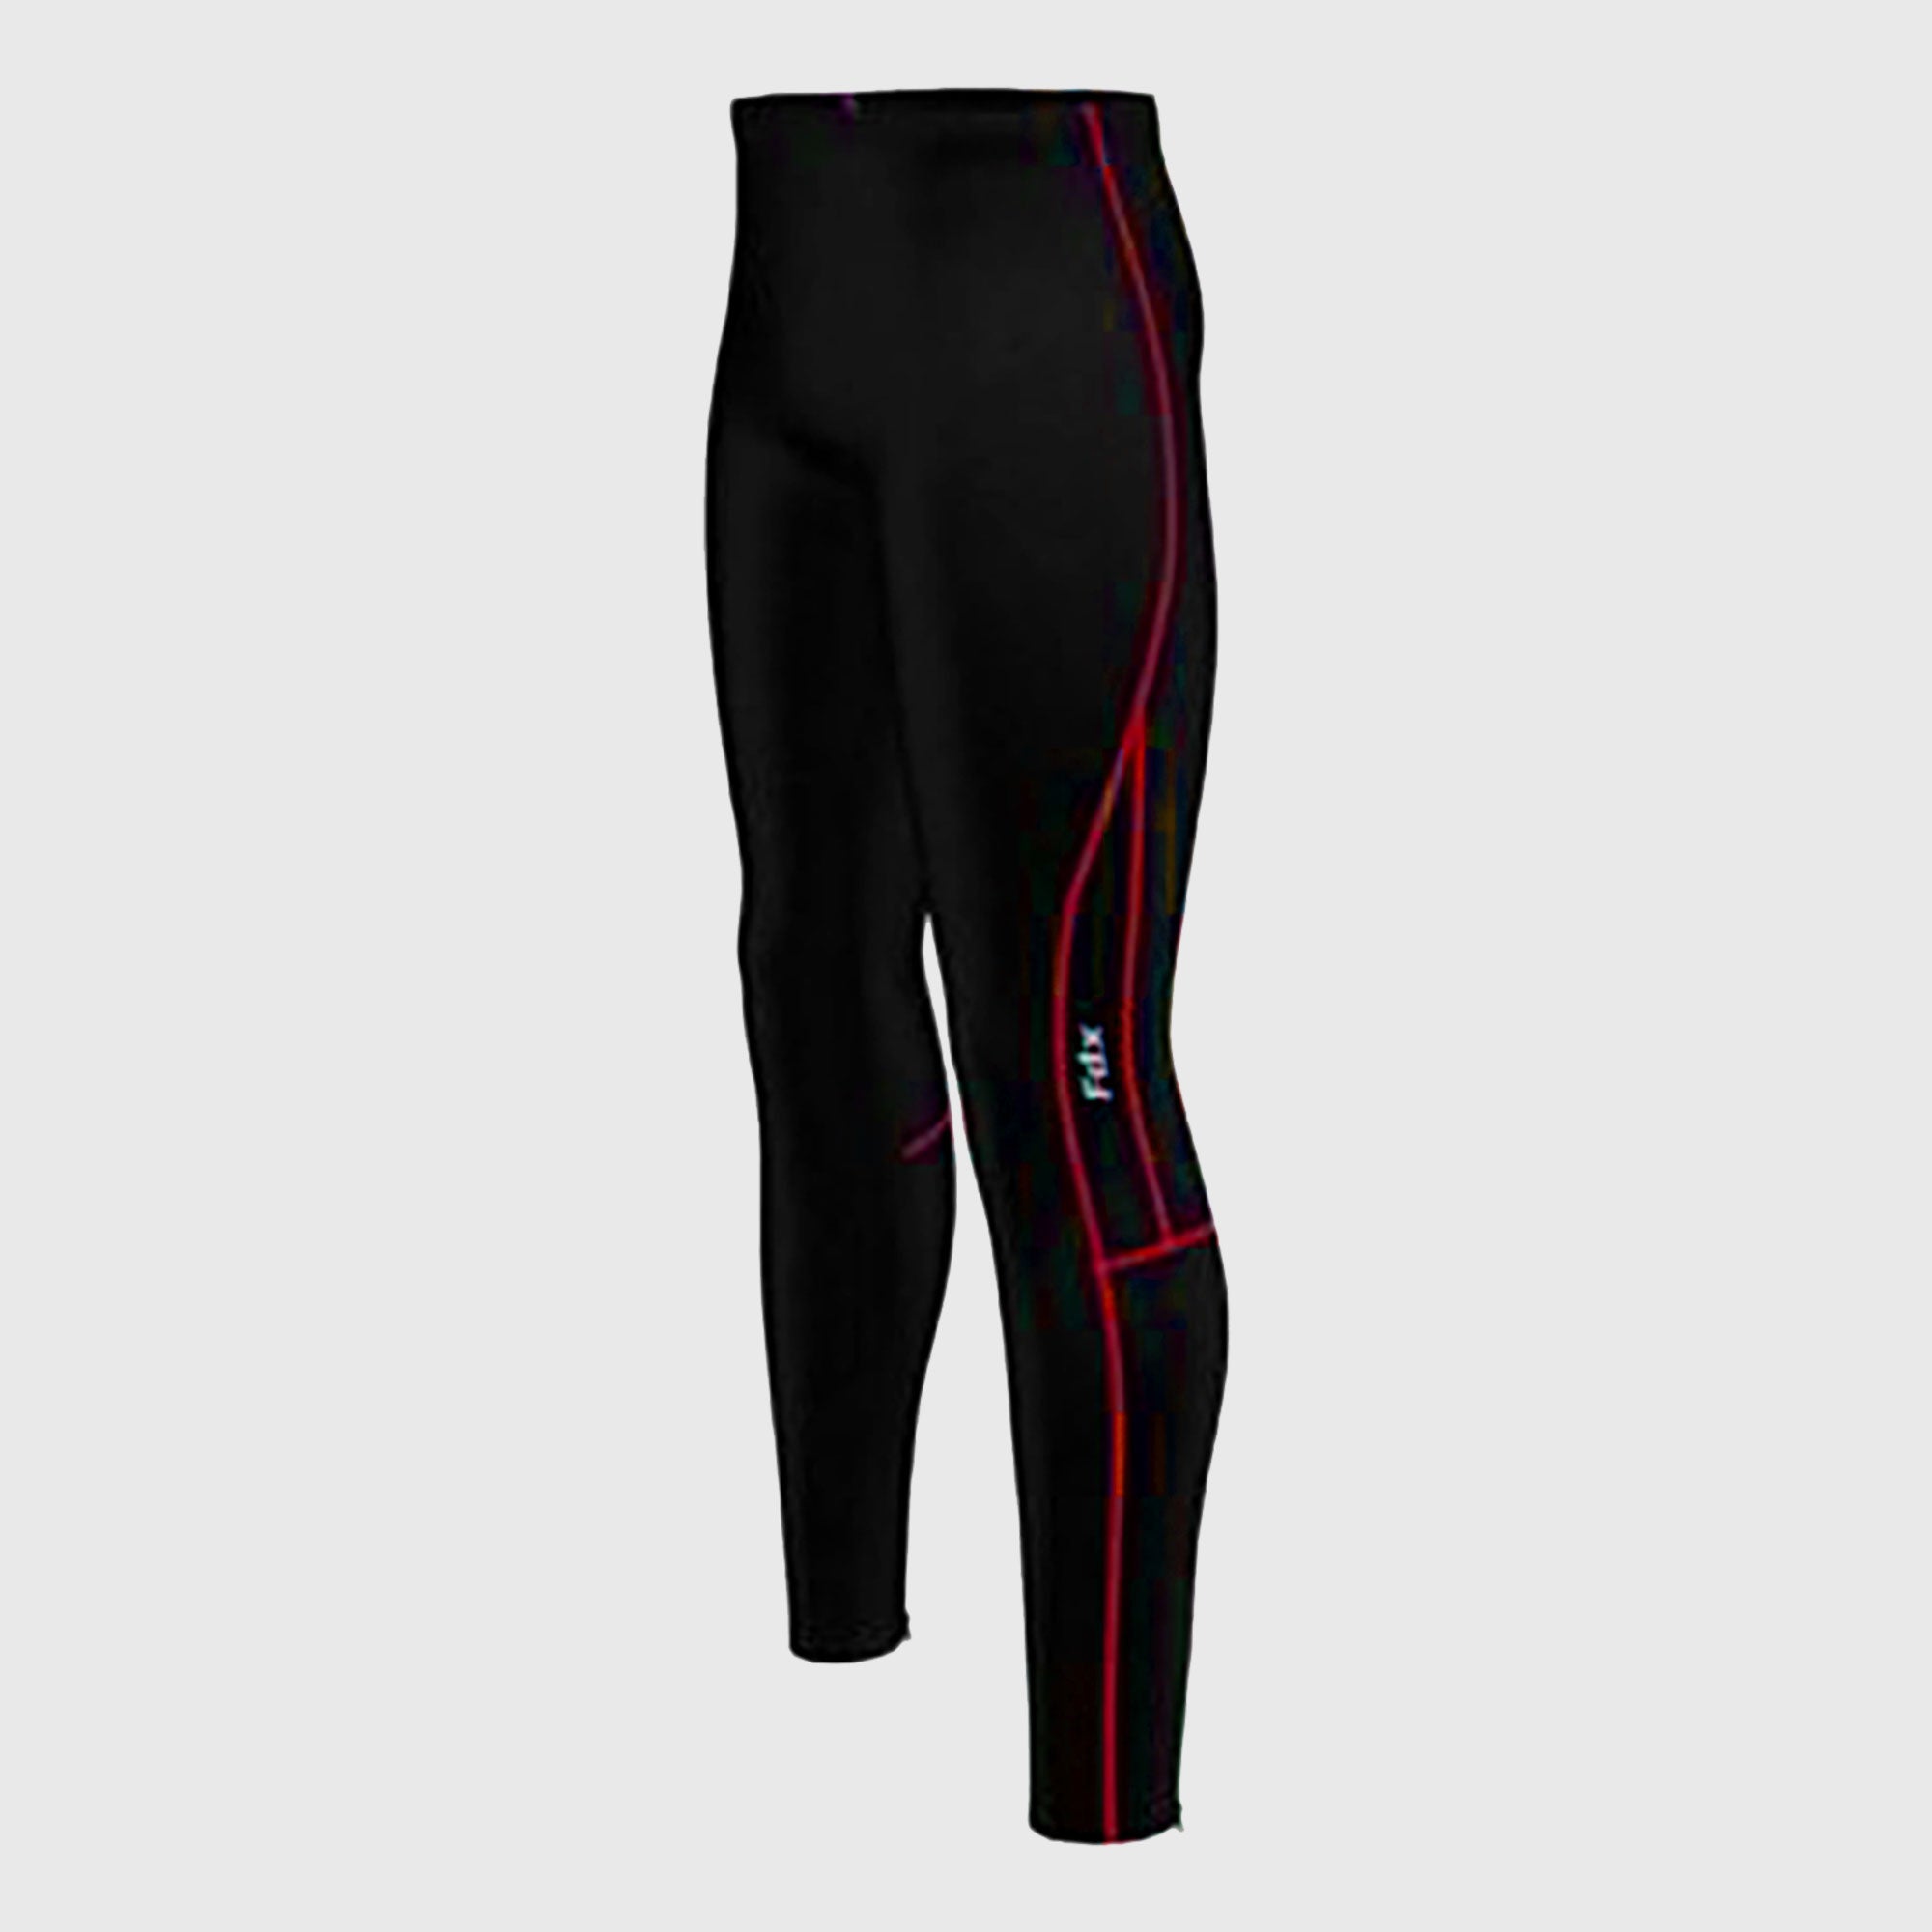 Fdx Heatchaser Men's Compression Winter Cycling Tights Black, Red